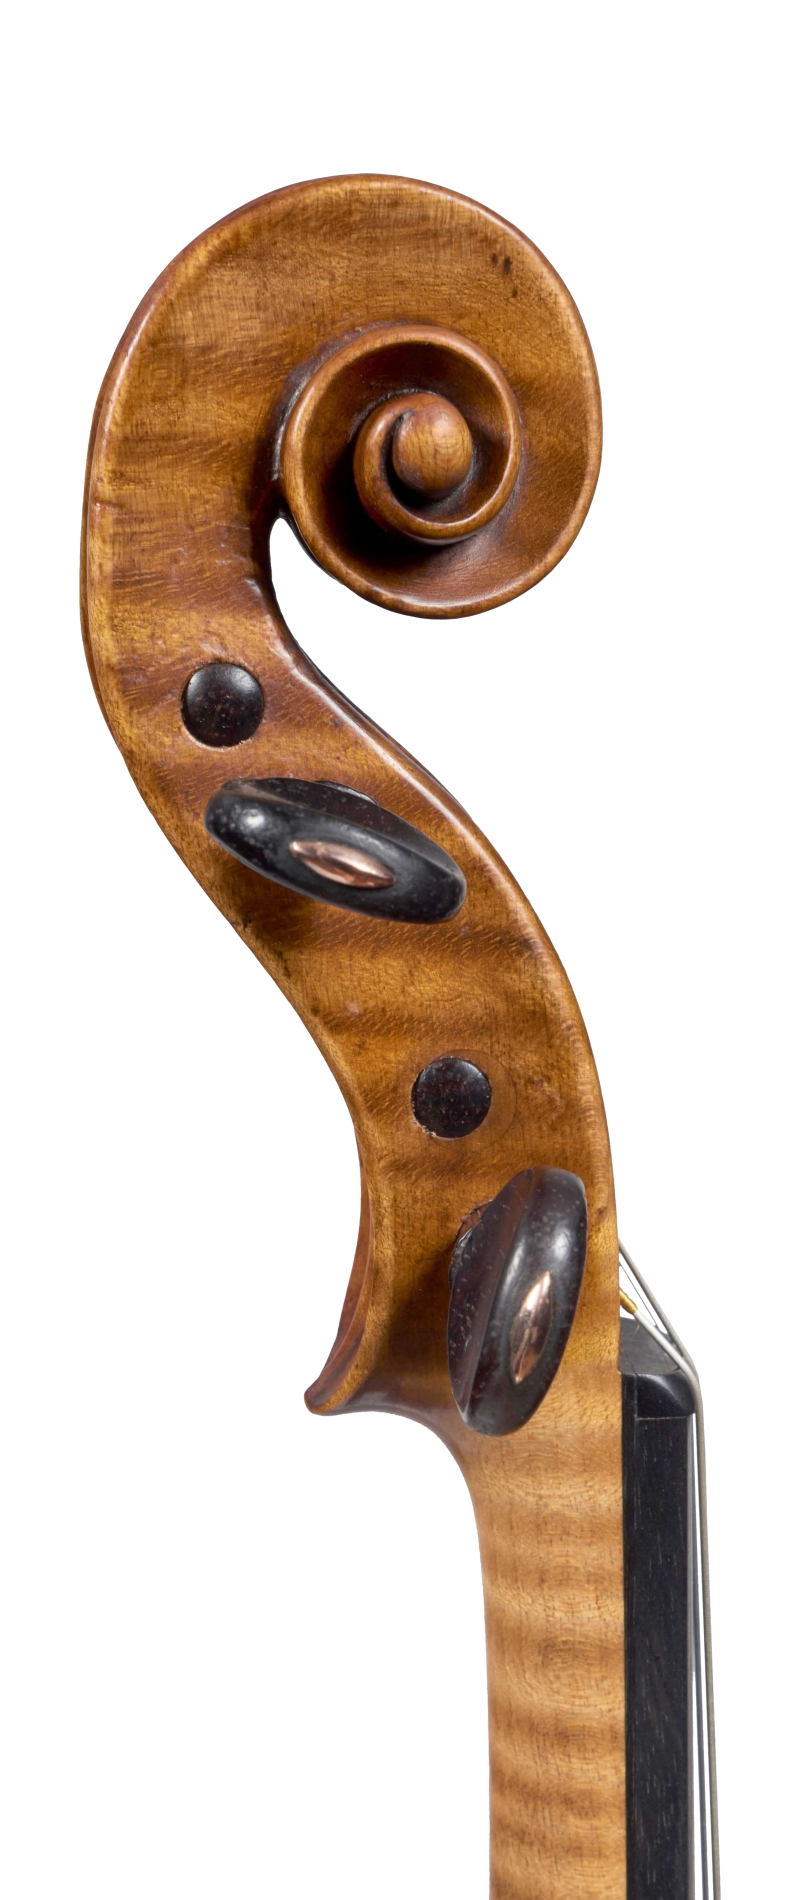 Scroll of a violin by Antonio Gragnani, 1776. This violin is a very representative example of the maker’s output, with a beautiful and piercing tone which is colourful and carries well in all registers.